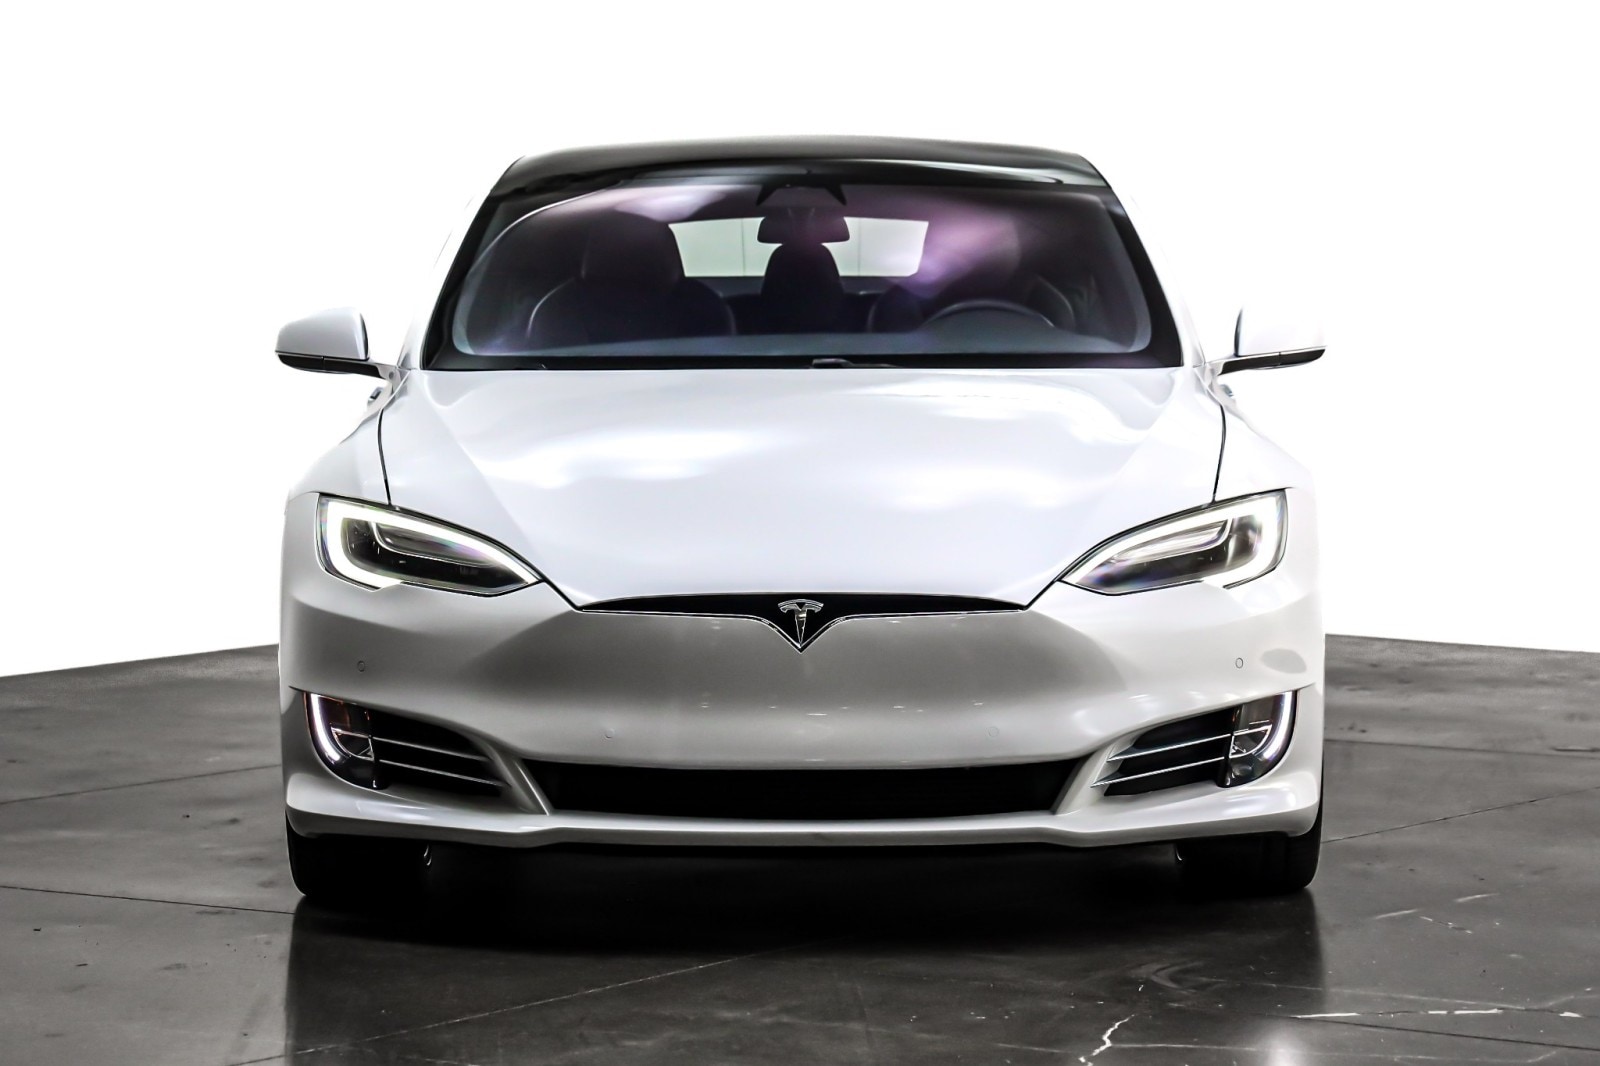 Used 2020 Tesla Model S Performance with VIN 5YJSA1E46LF359849 for sale in Costa Mesa, CA